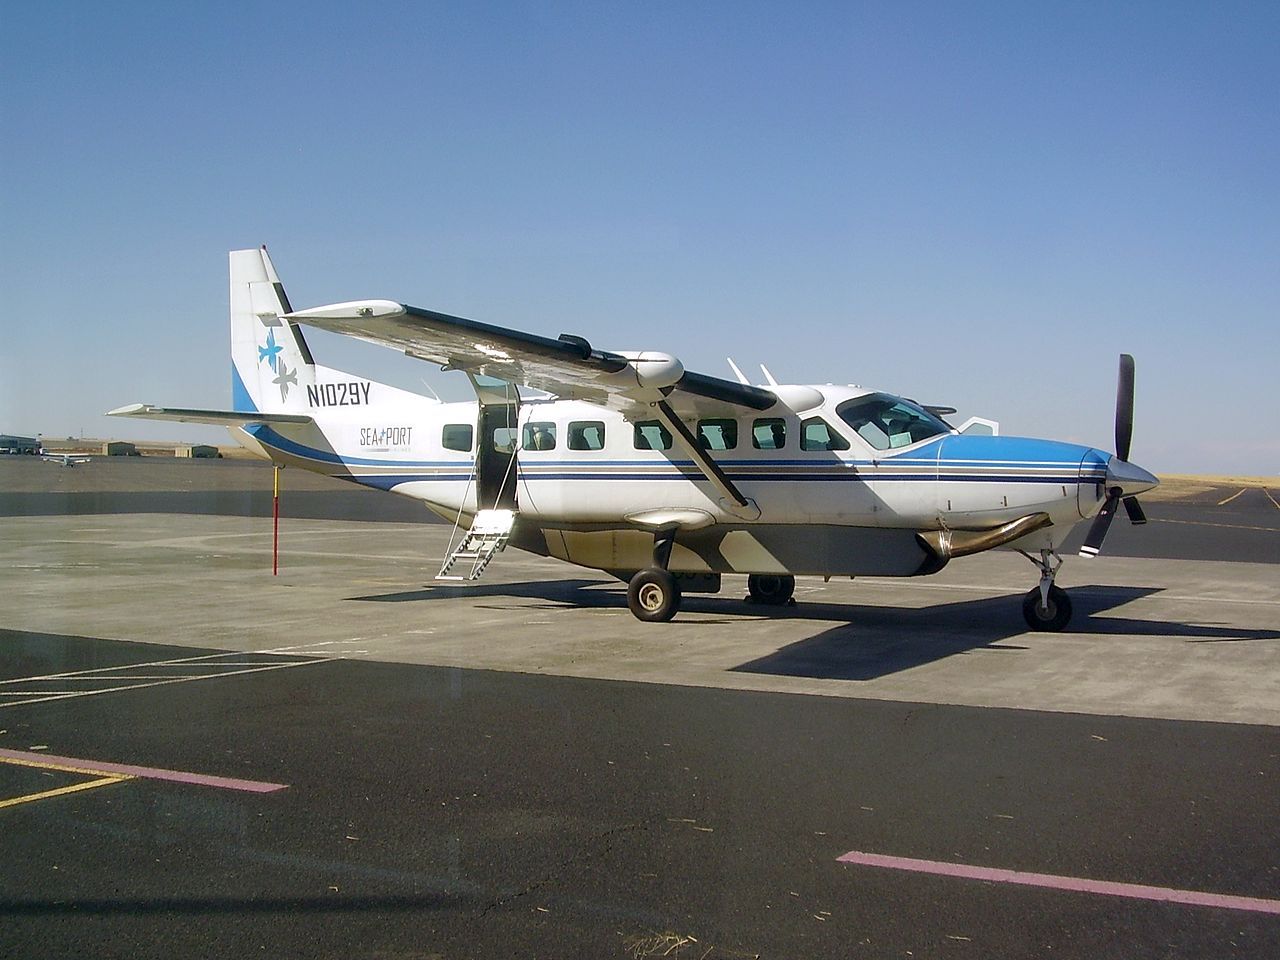 A SeaPort Airlines Cessna Caravan, registration N1029Y, parked at PDT airport.